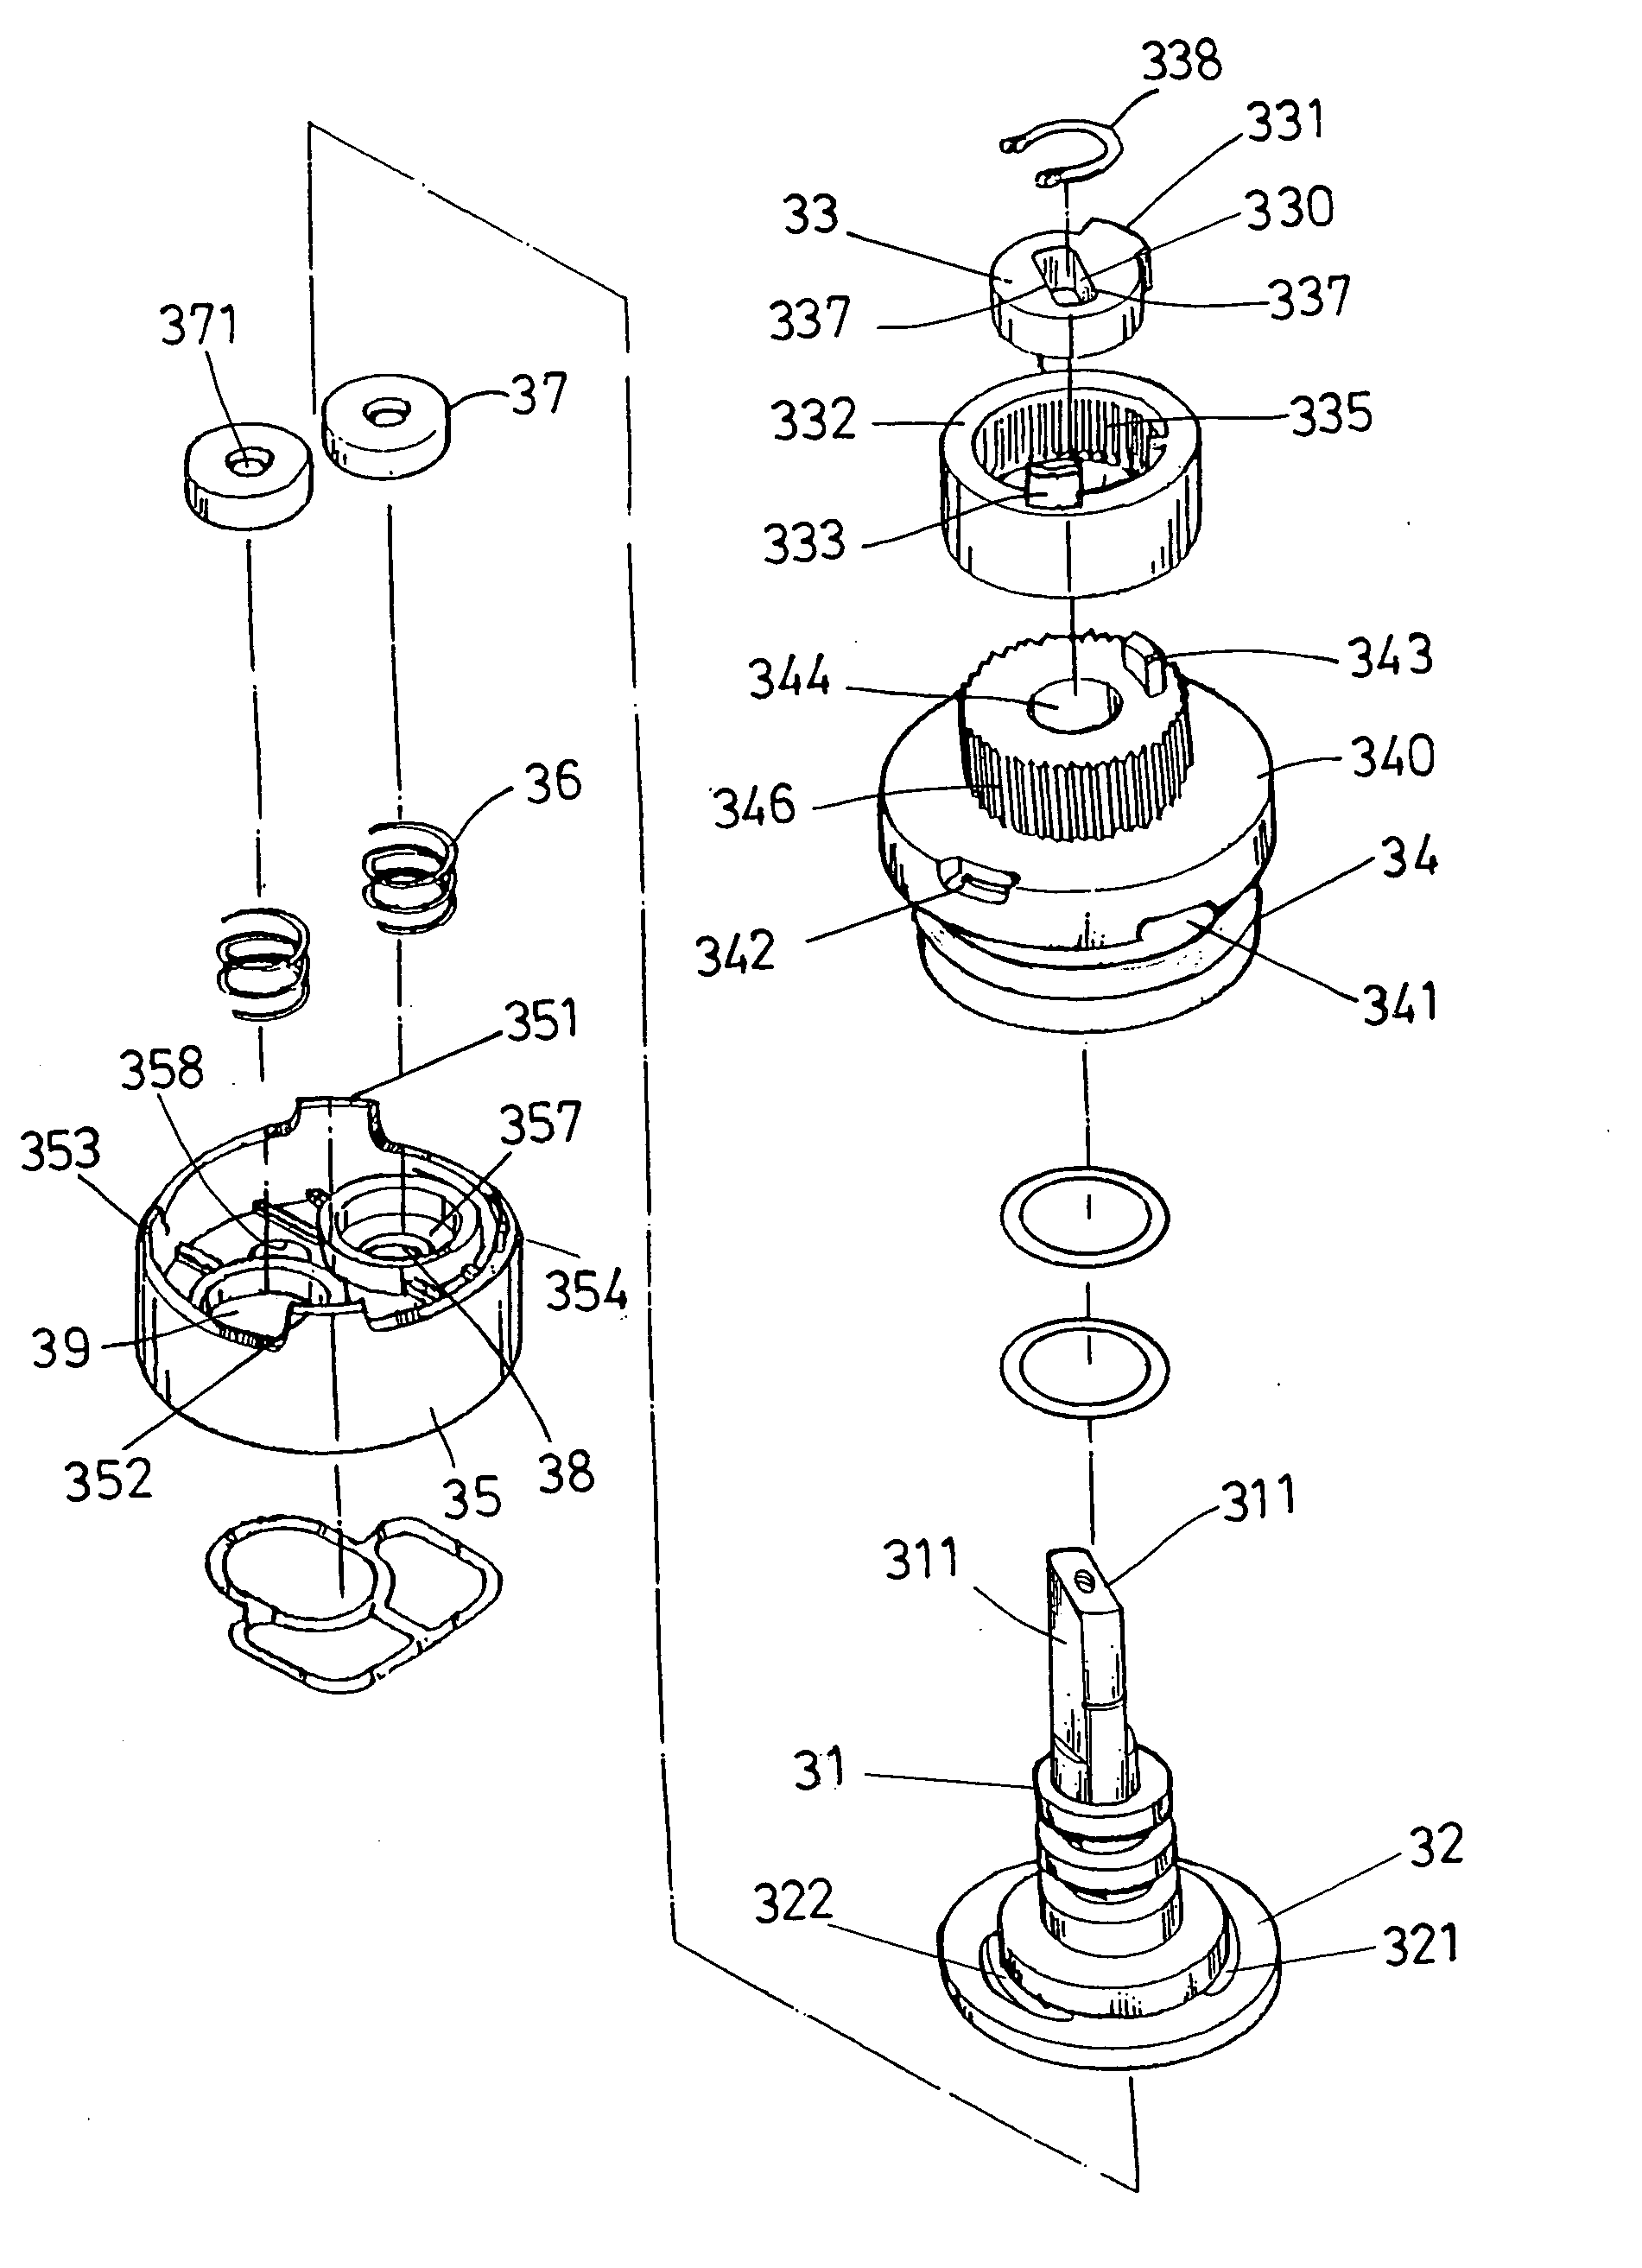 Valve for mixing cold and hot water